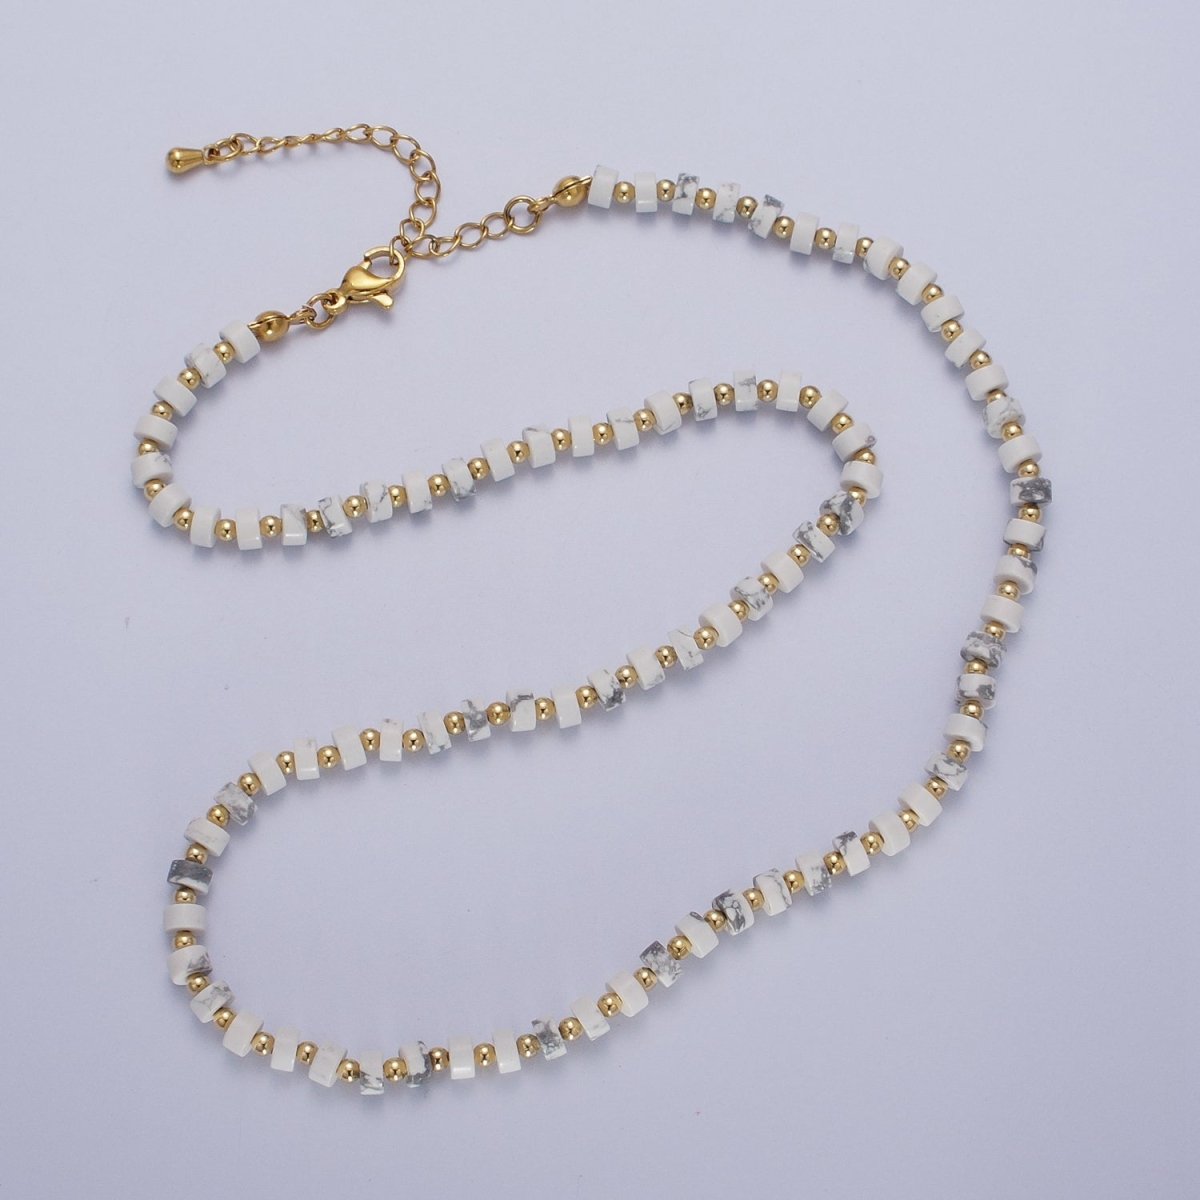 Gold Filled White Howlite Rondelle Heishi Gemstone Gold Spacer Beads 16 Inch Choker Necklace | WA-1437 Clearance Pricing - DLUXCA